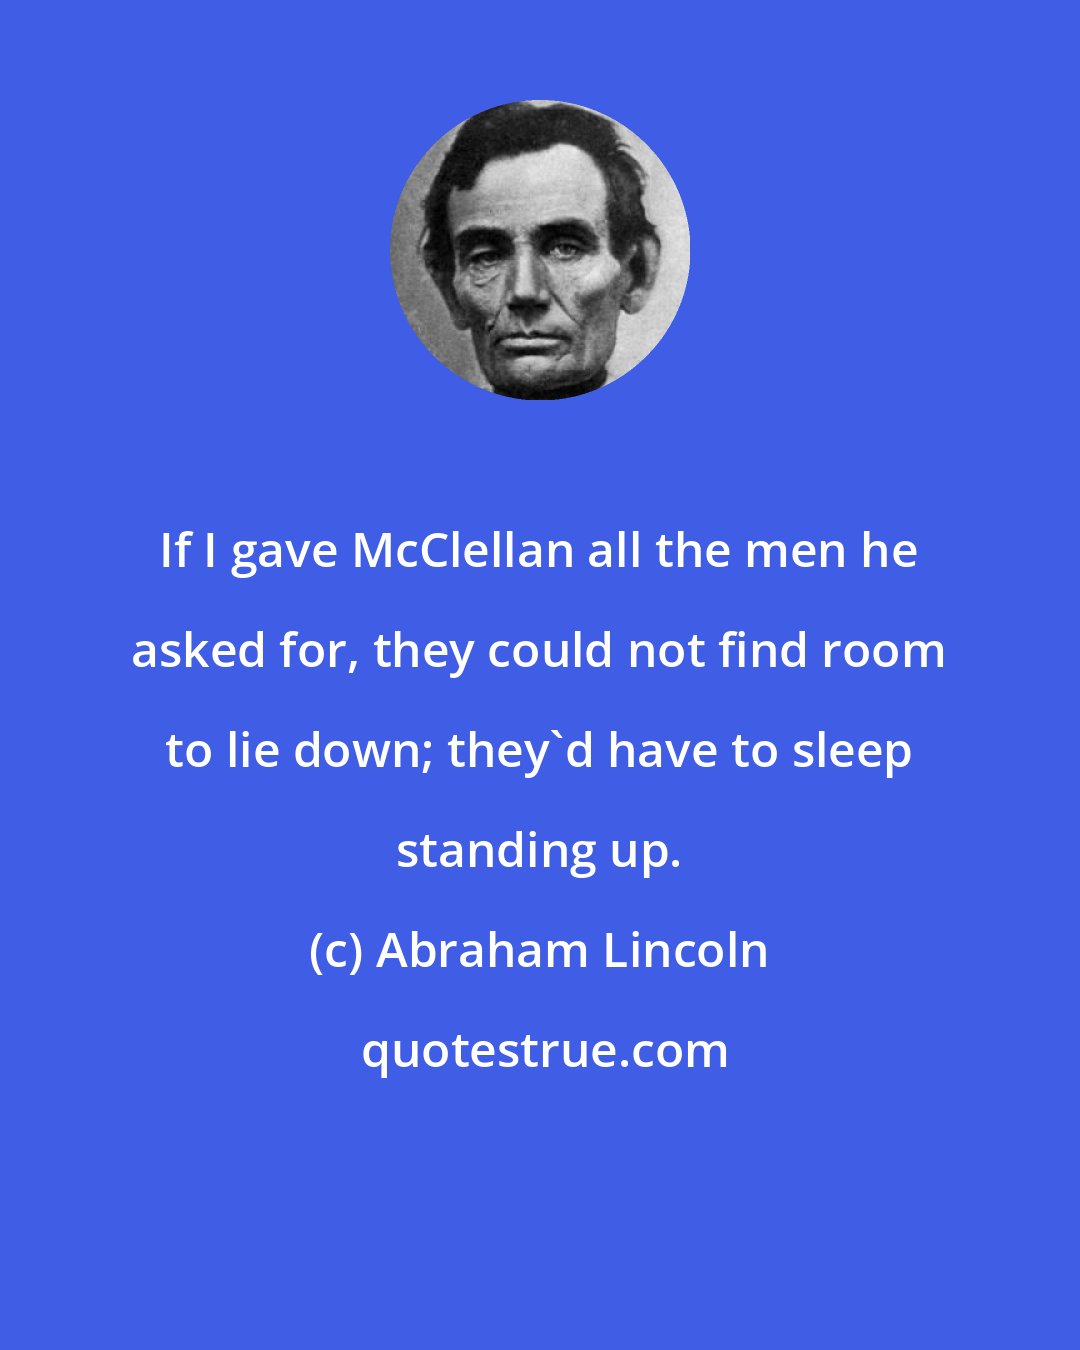 Abraham Lincoln: If I gave McClellan all the men he asked for, they could not find room to lie down; they'd have to sleep standing up.